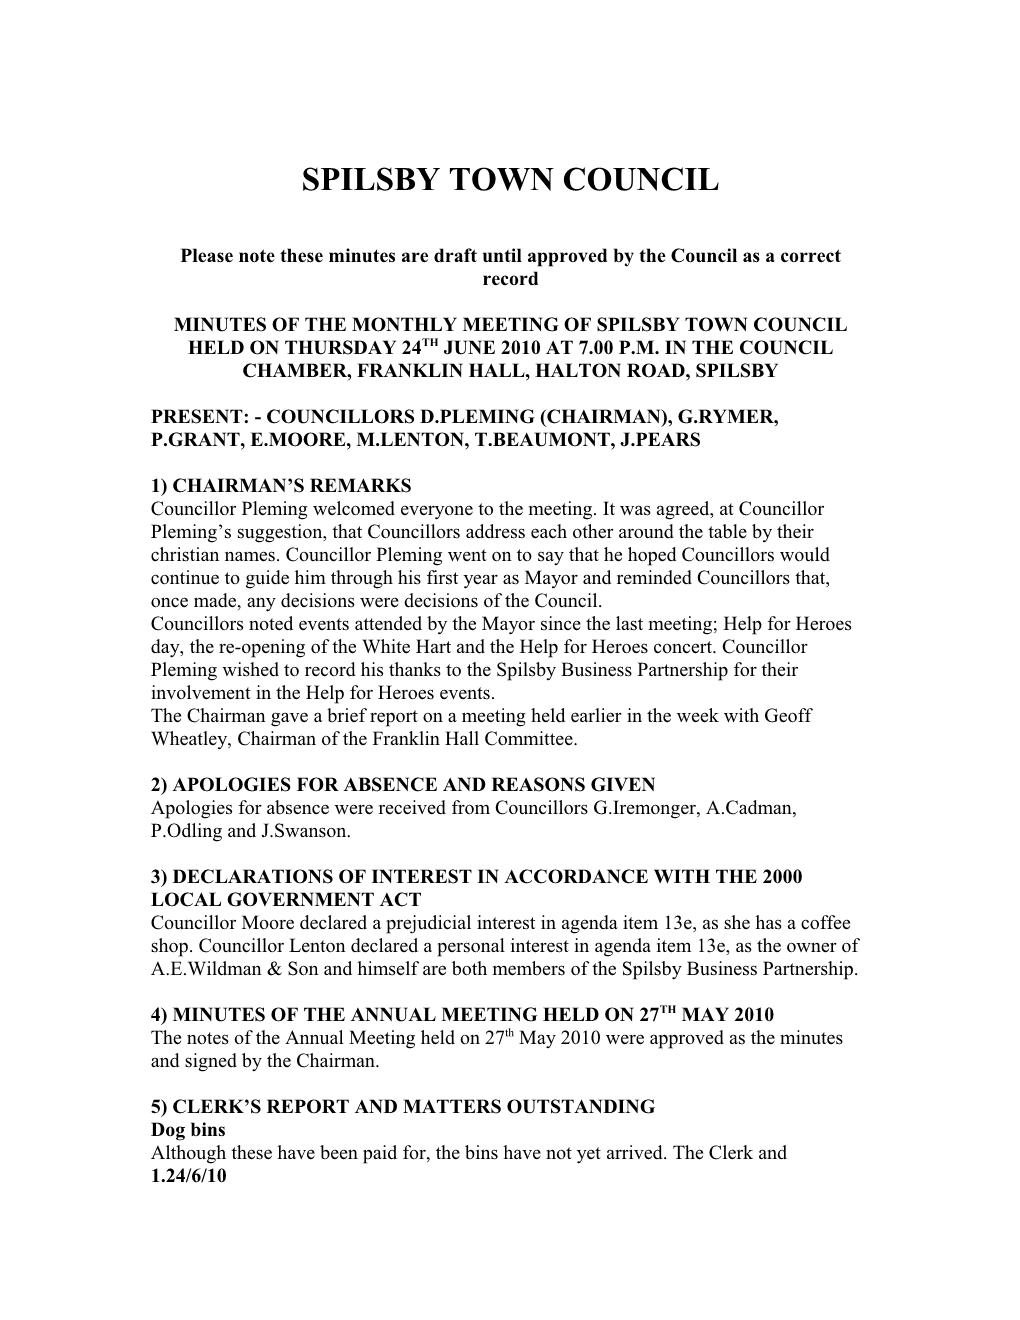 Minutes of the Meeting of Spilsby Town Council Held on Wednesday 7Th March 2007 at 7